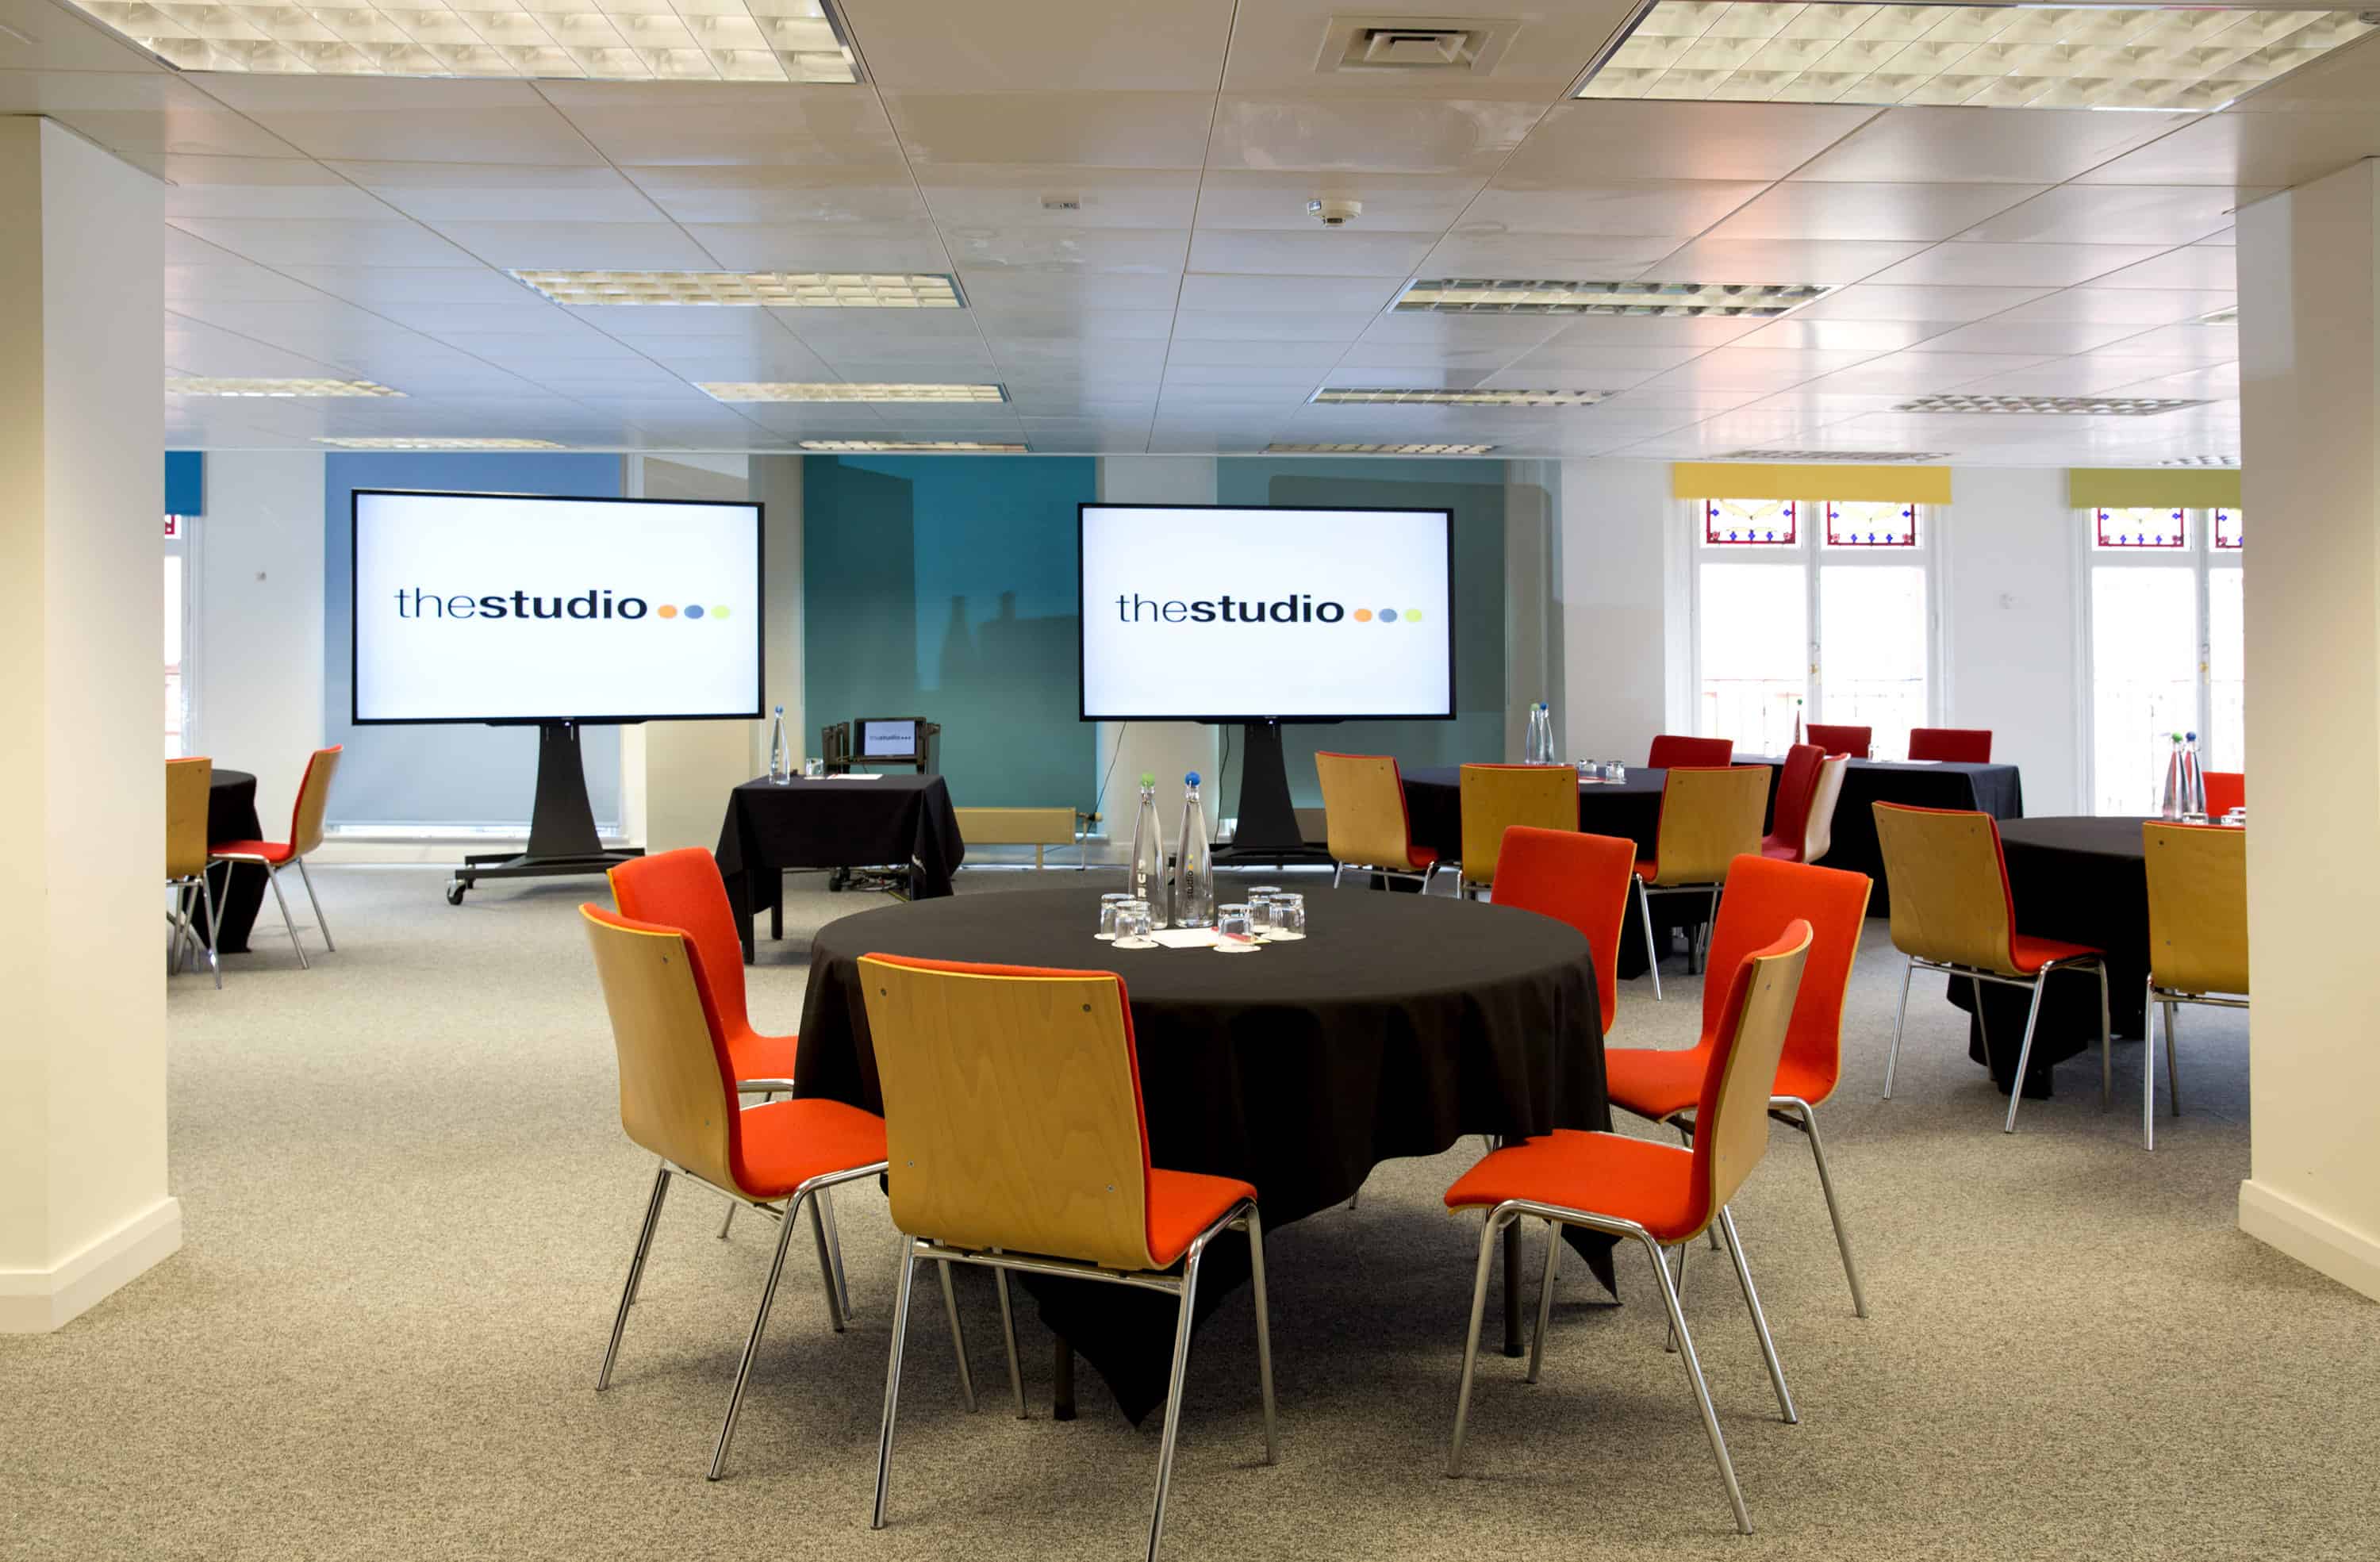 the studio birmingham venue meetings and events space innovate